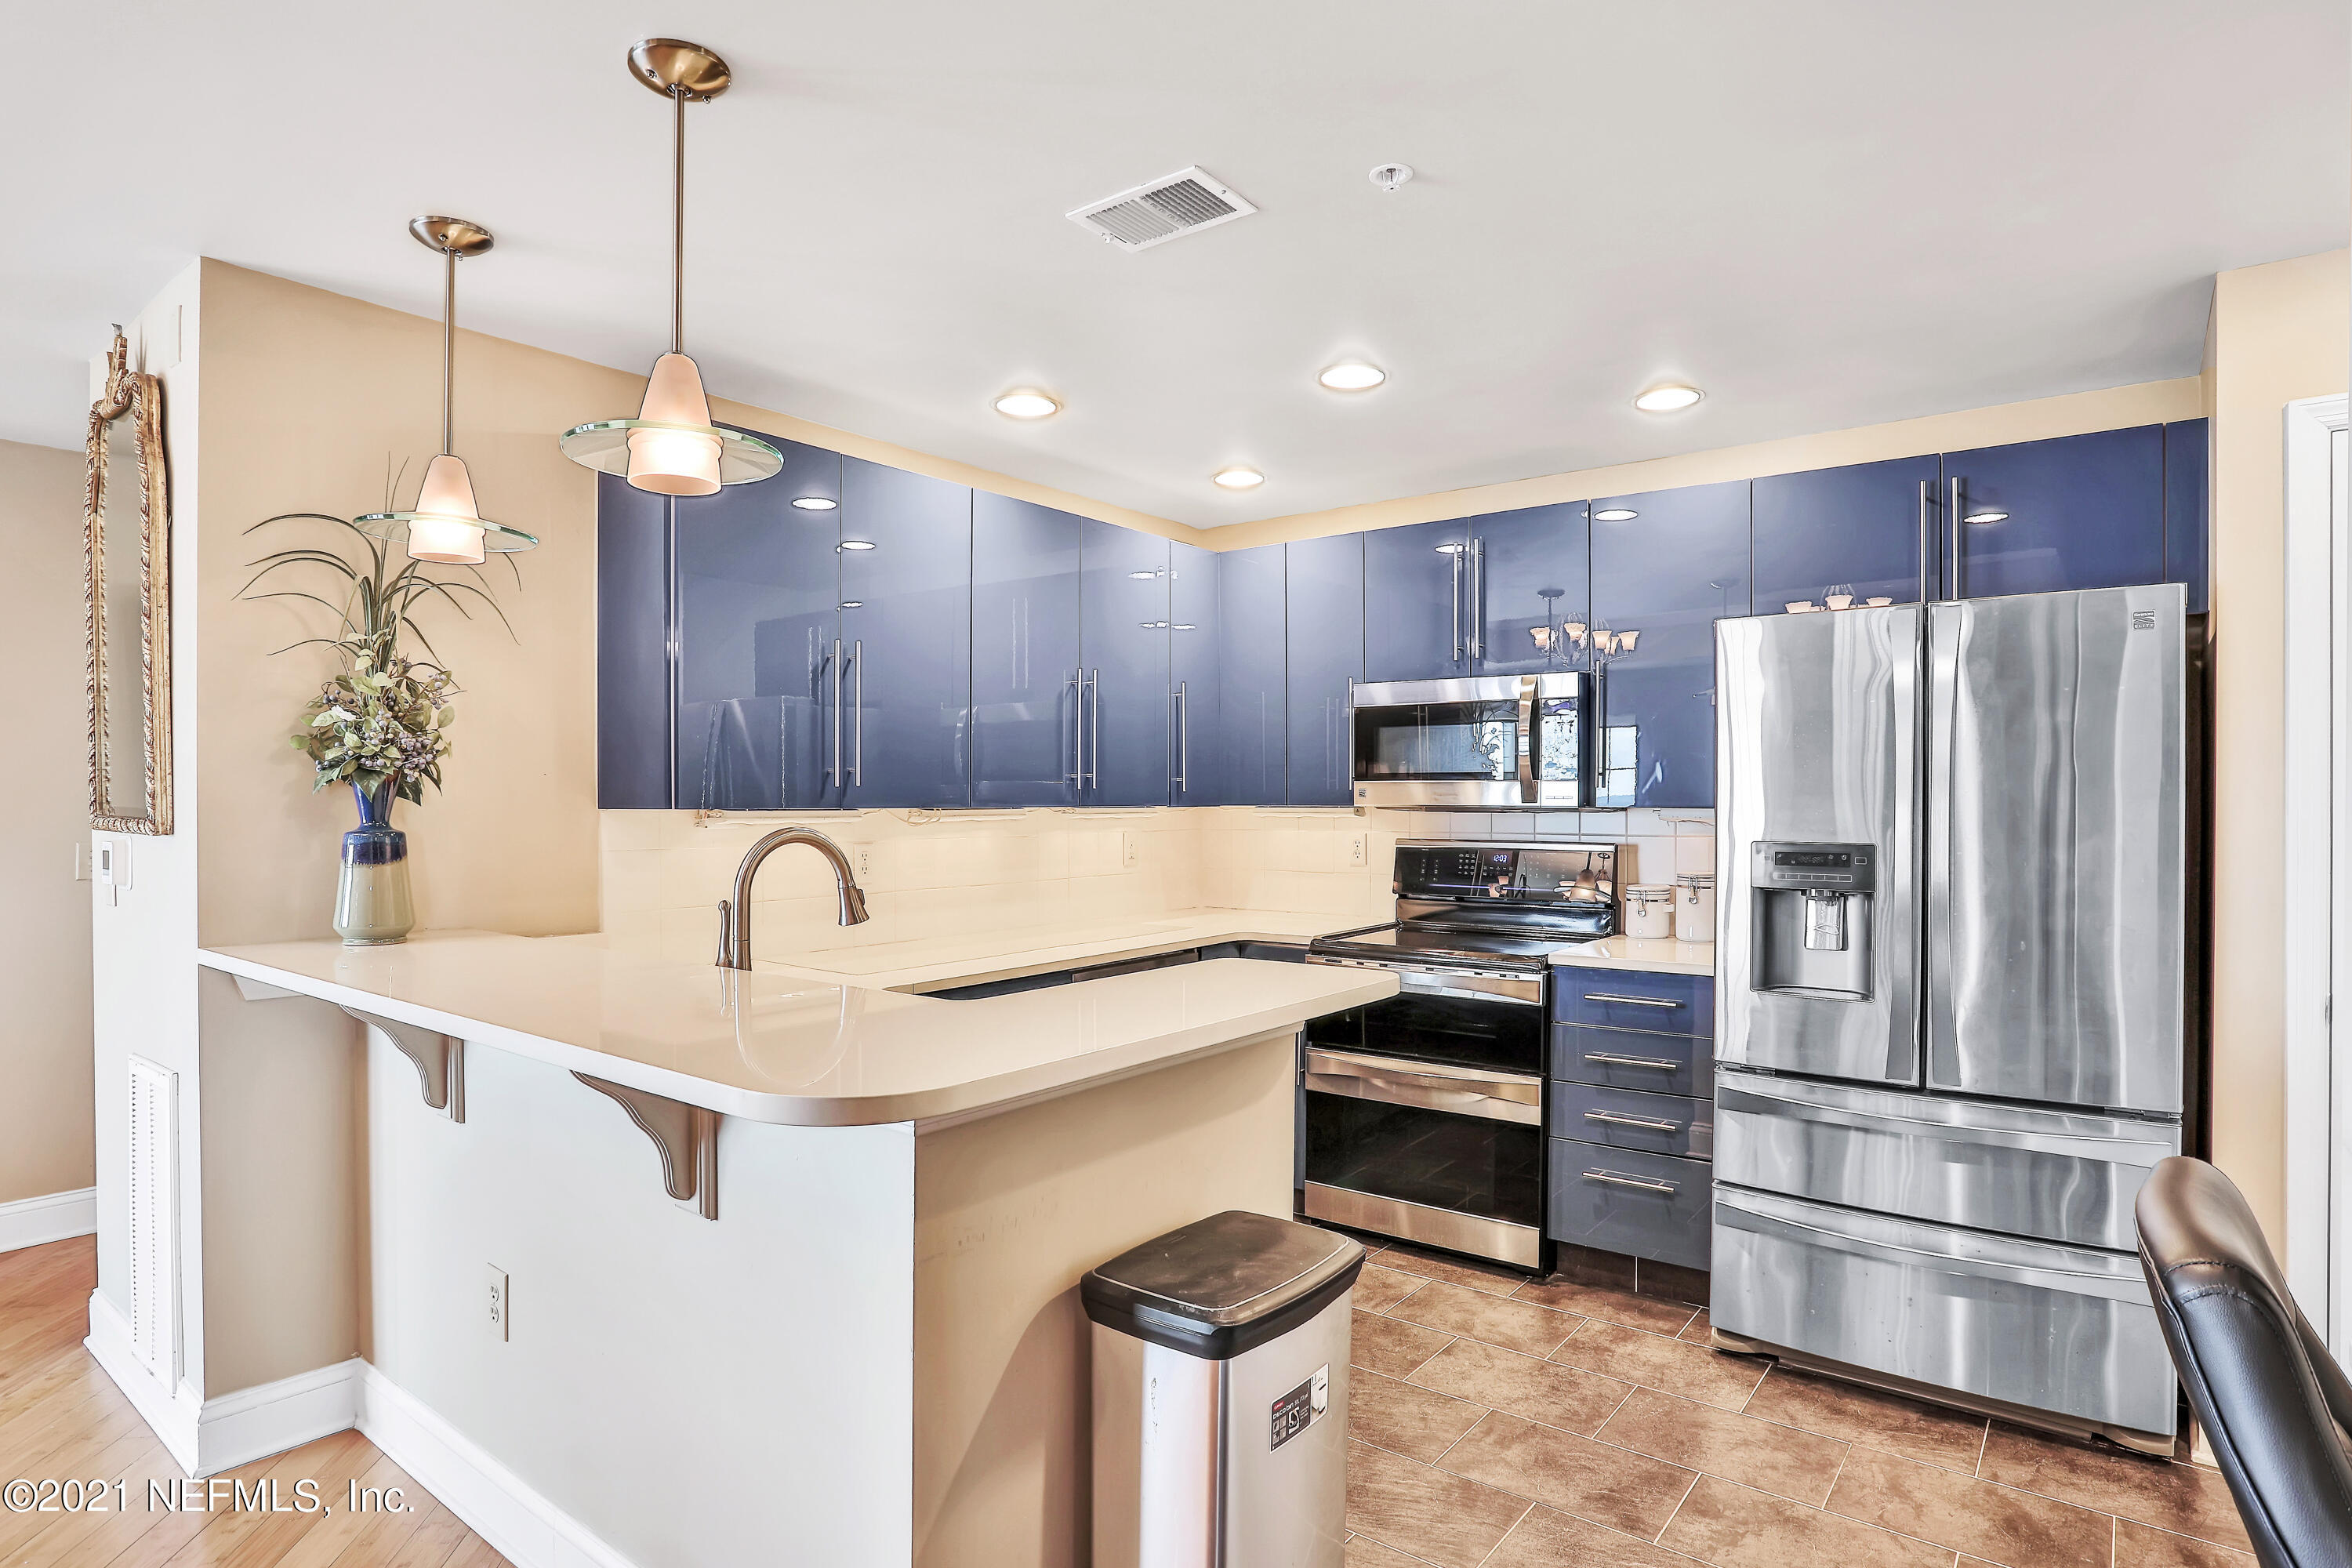 a kitchen with kitchen island a counter top space stainless steel appliances and cabinets